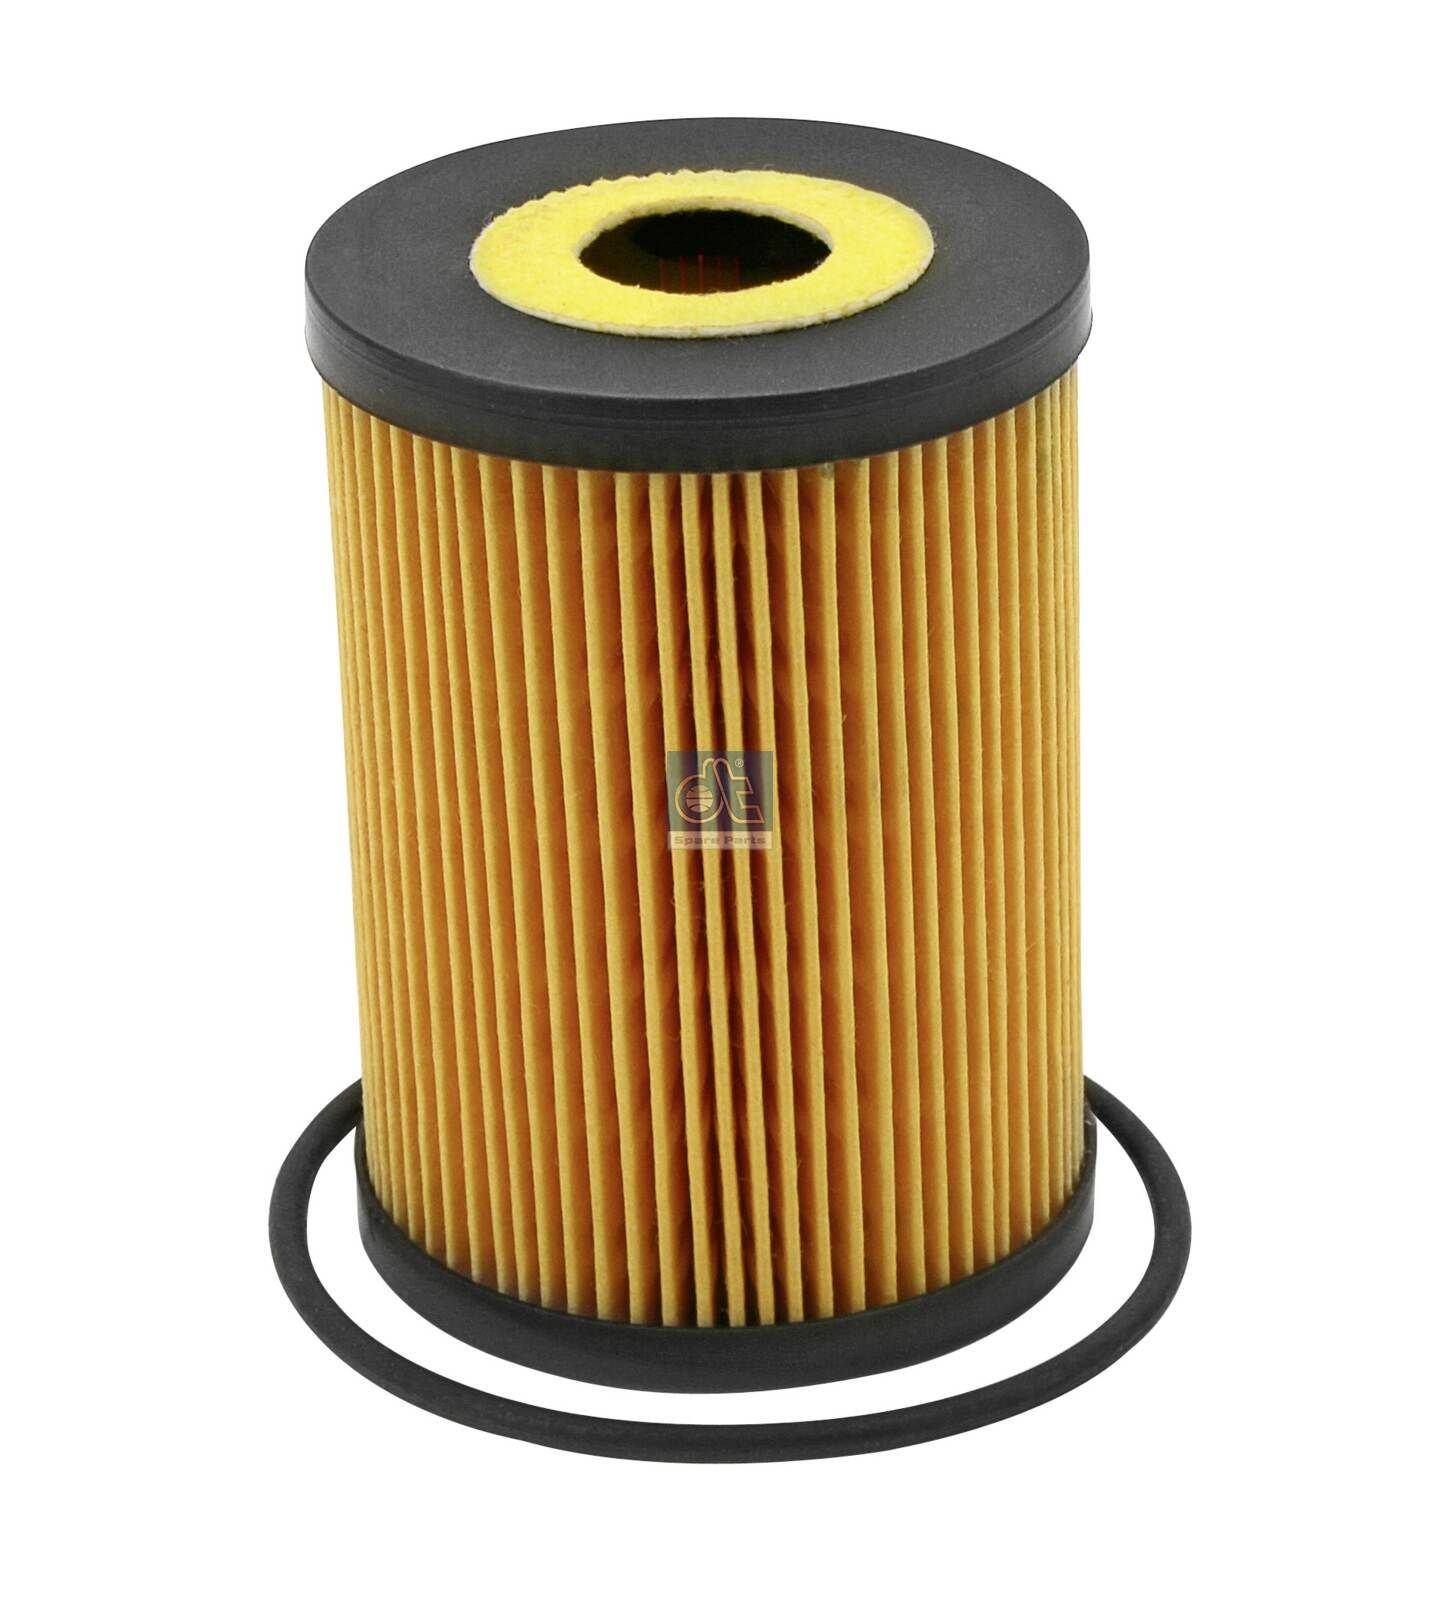 HU 825 x DT Spare Parts 6.33215 Oil filter AY110-NS002